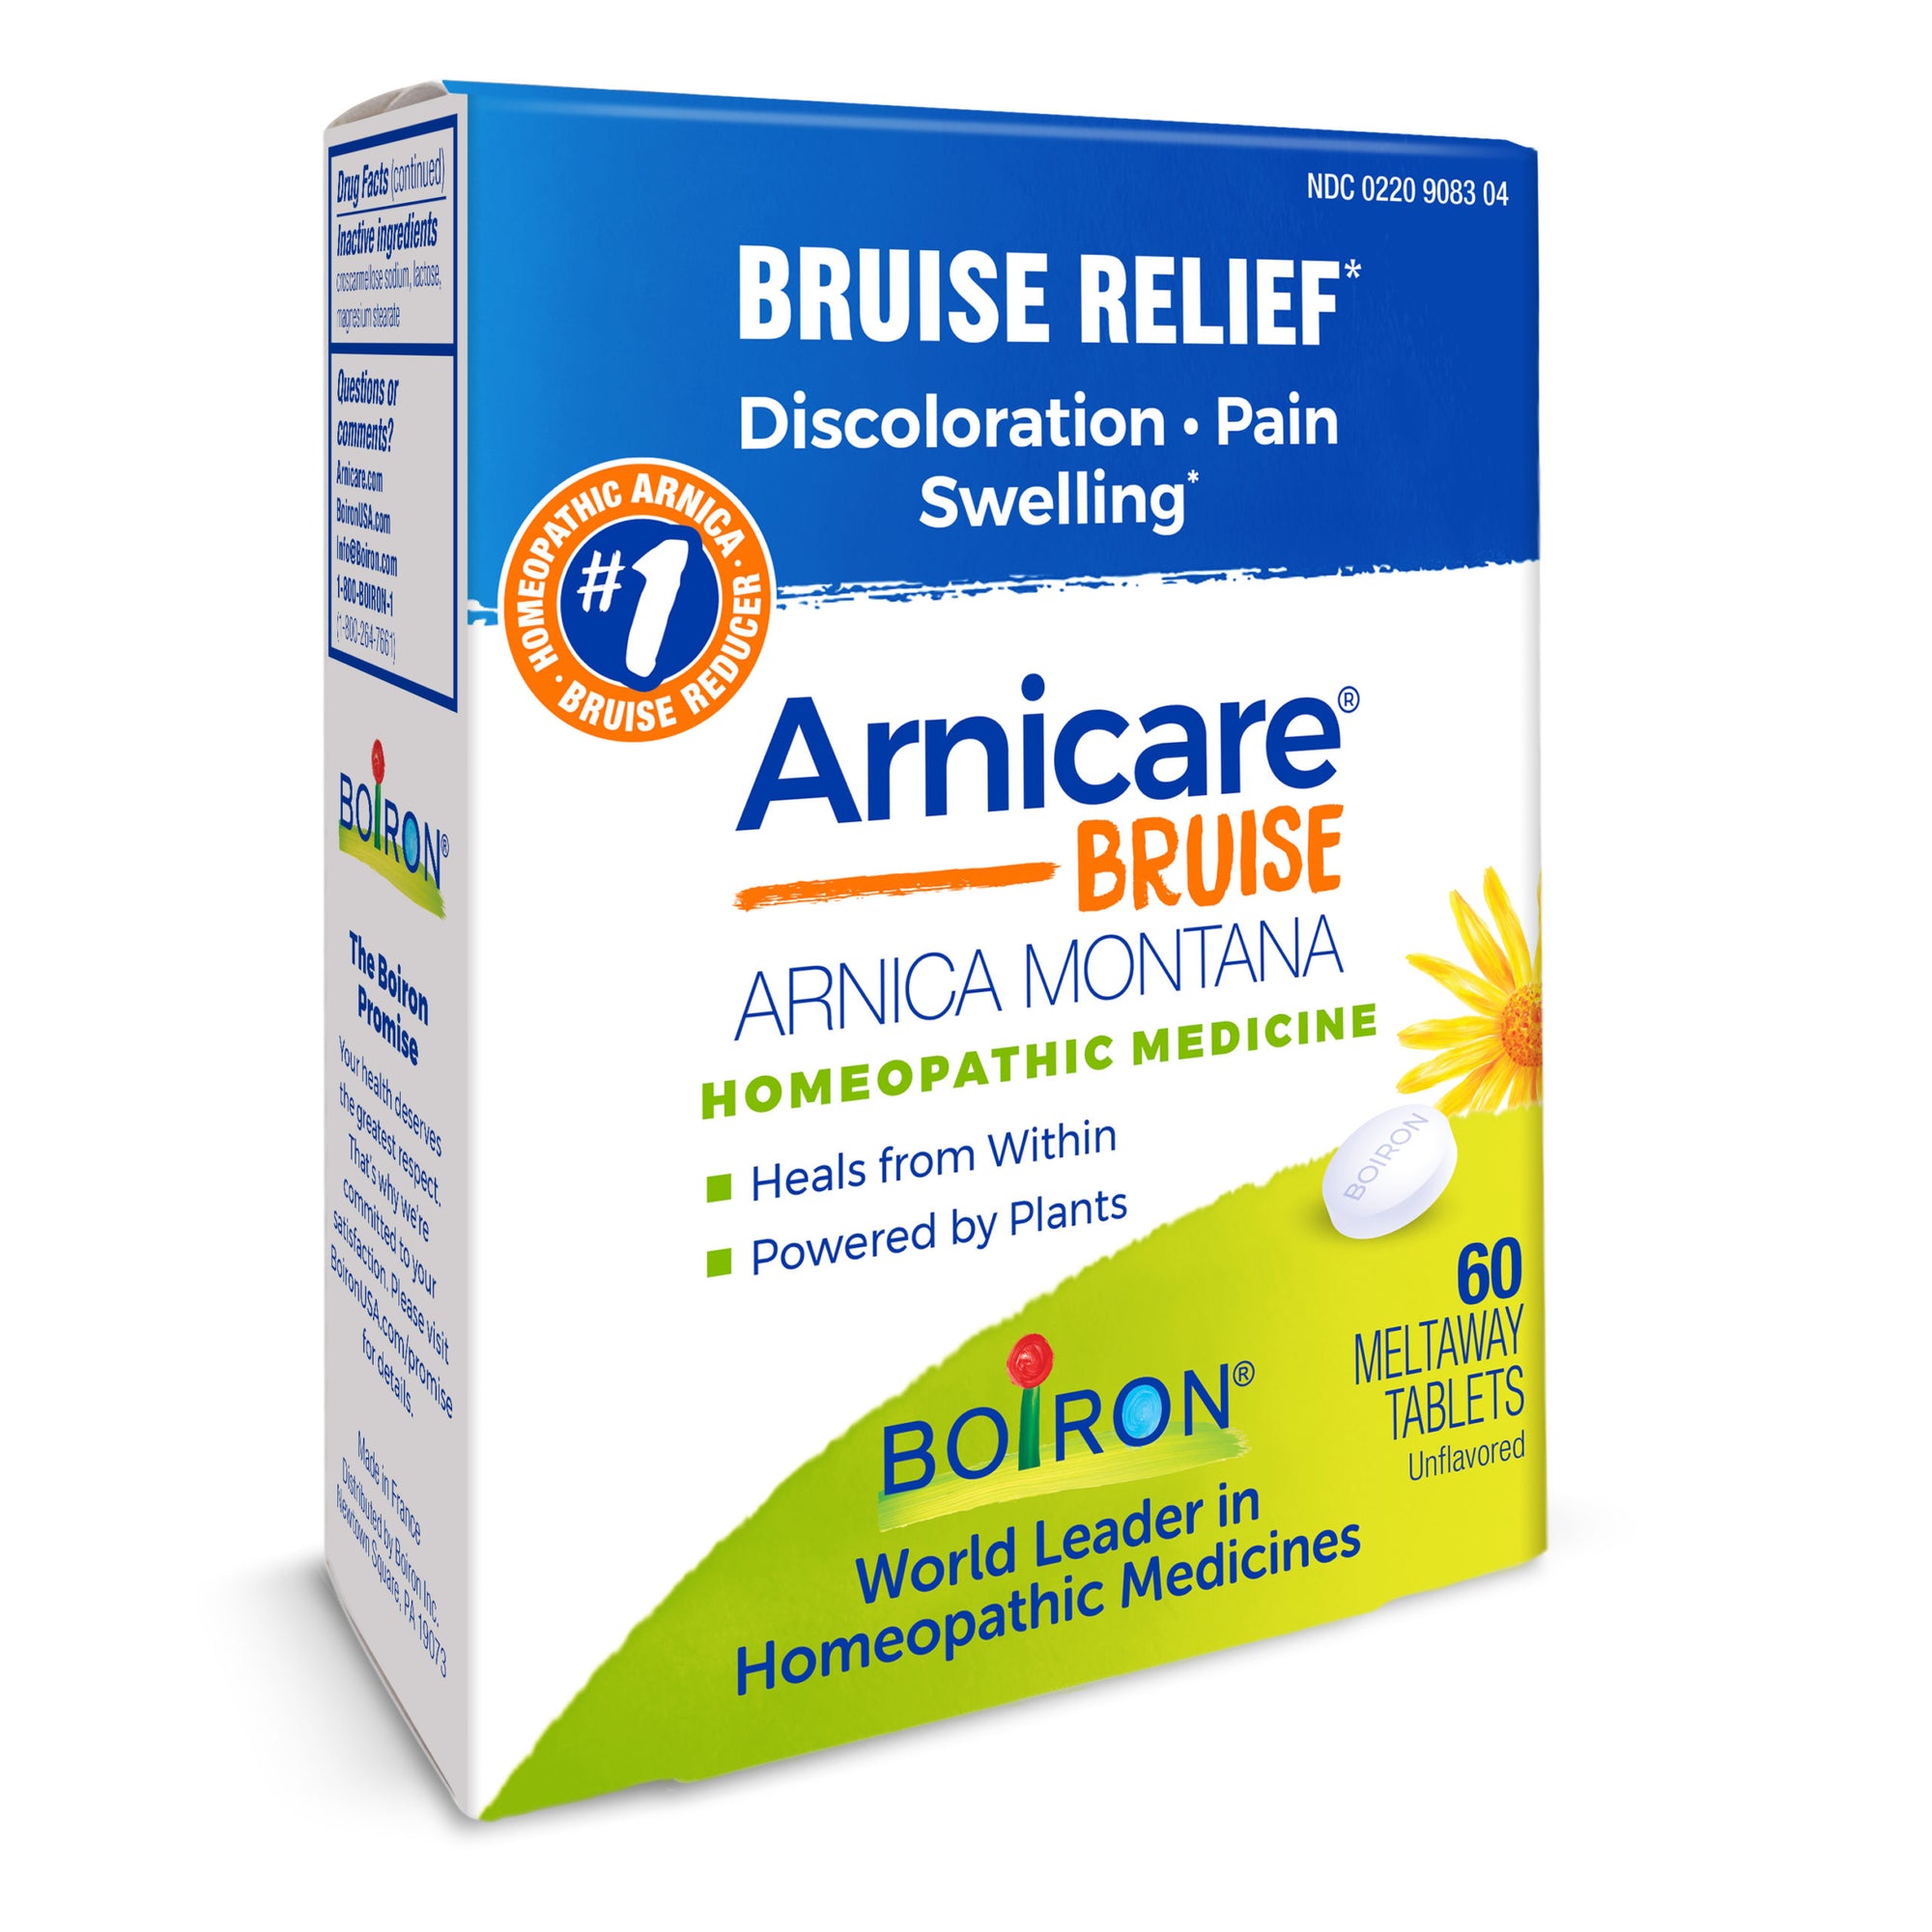 Arnicare Bruise Tablets